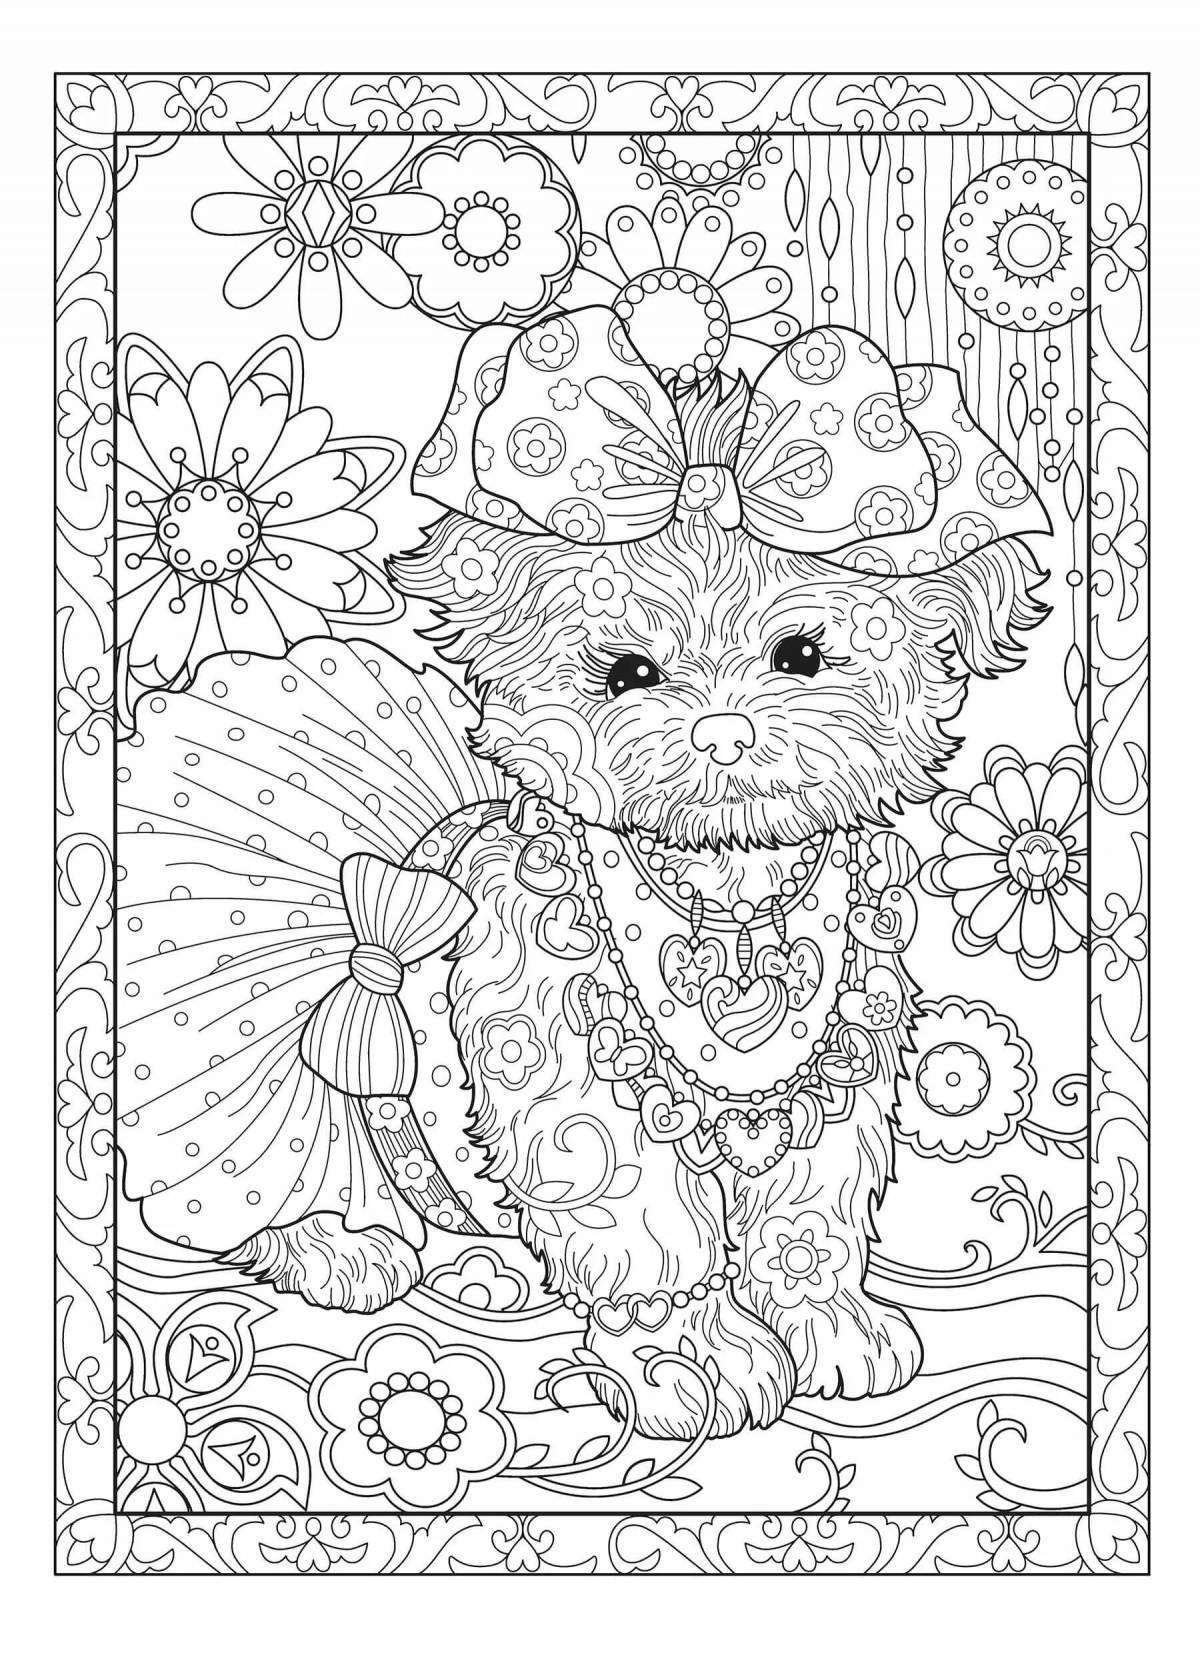 Amazing coloring book 